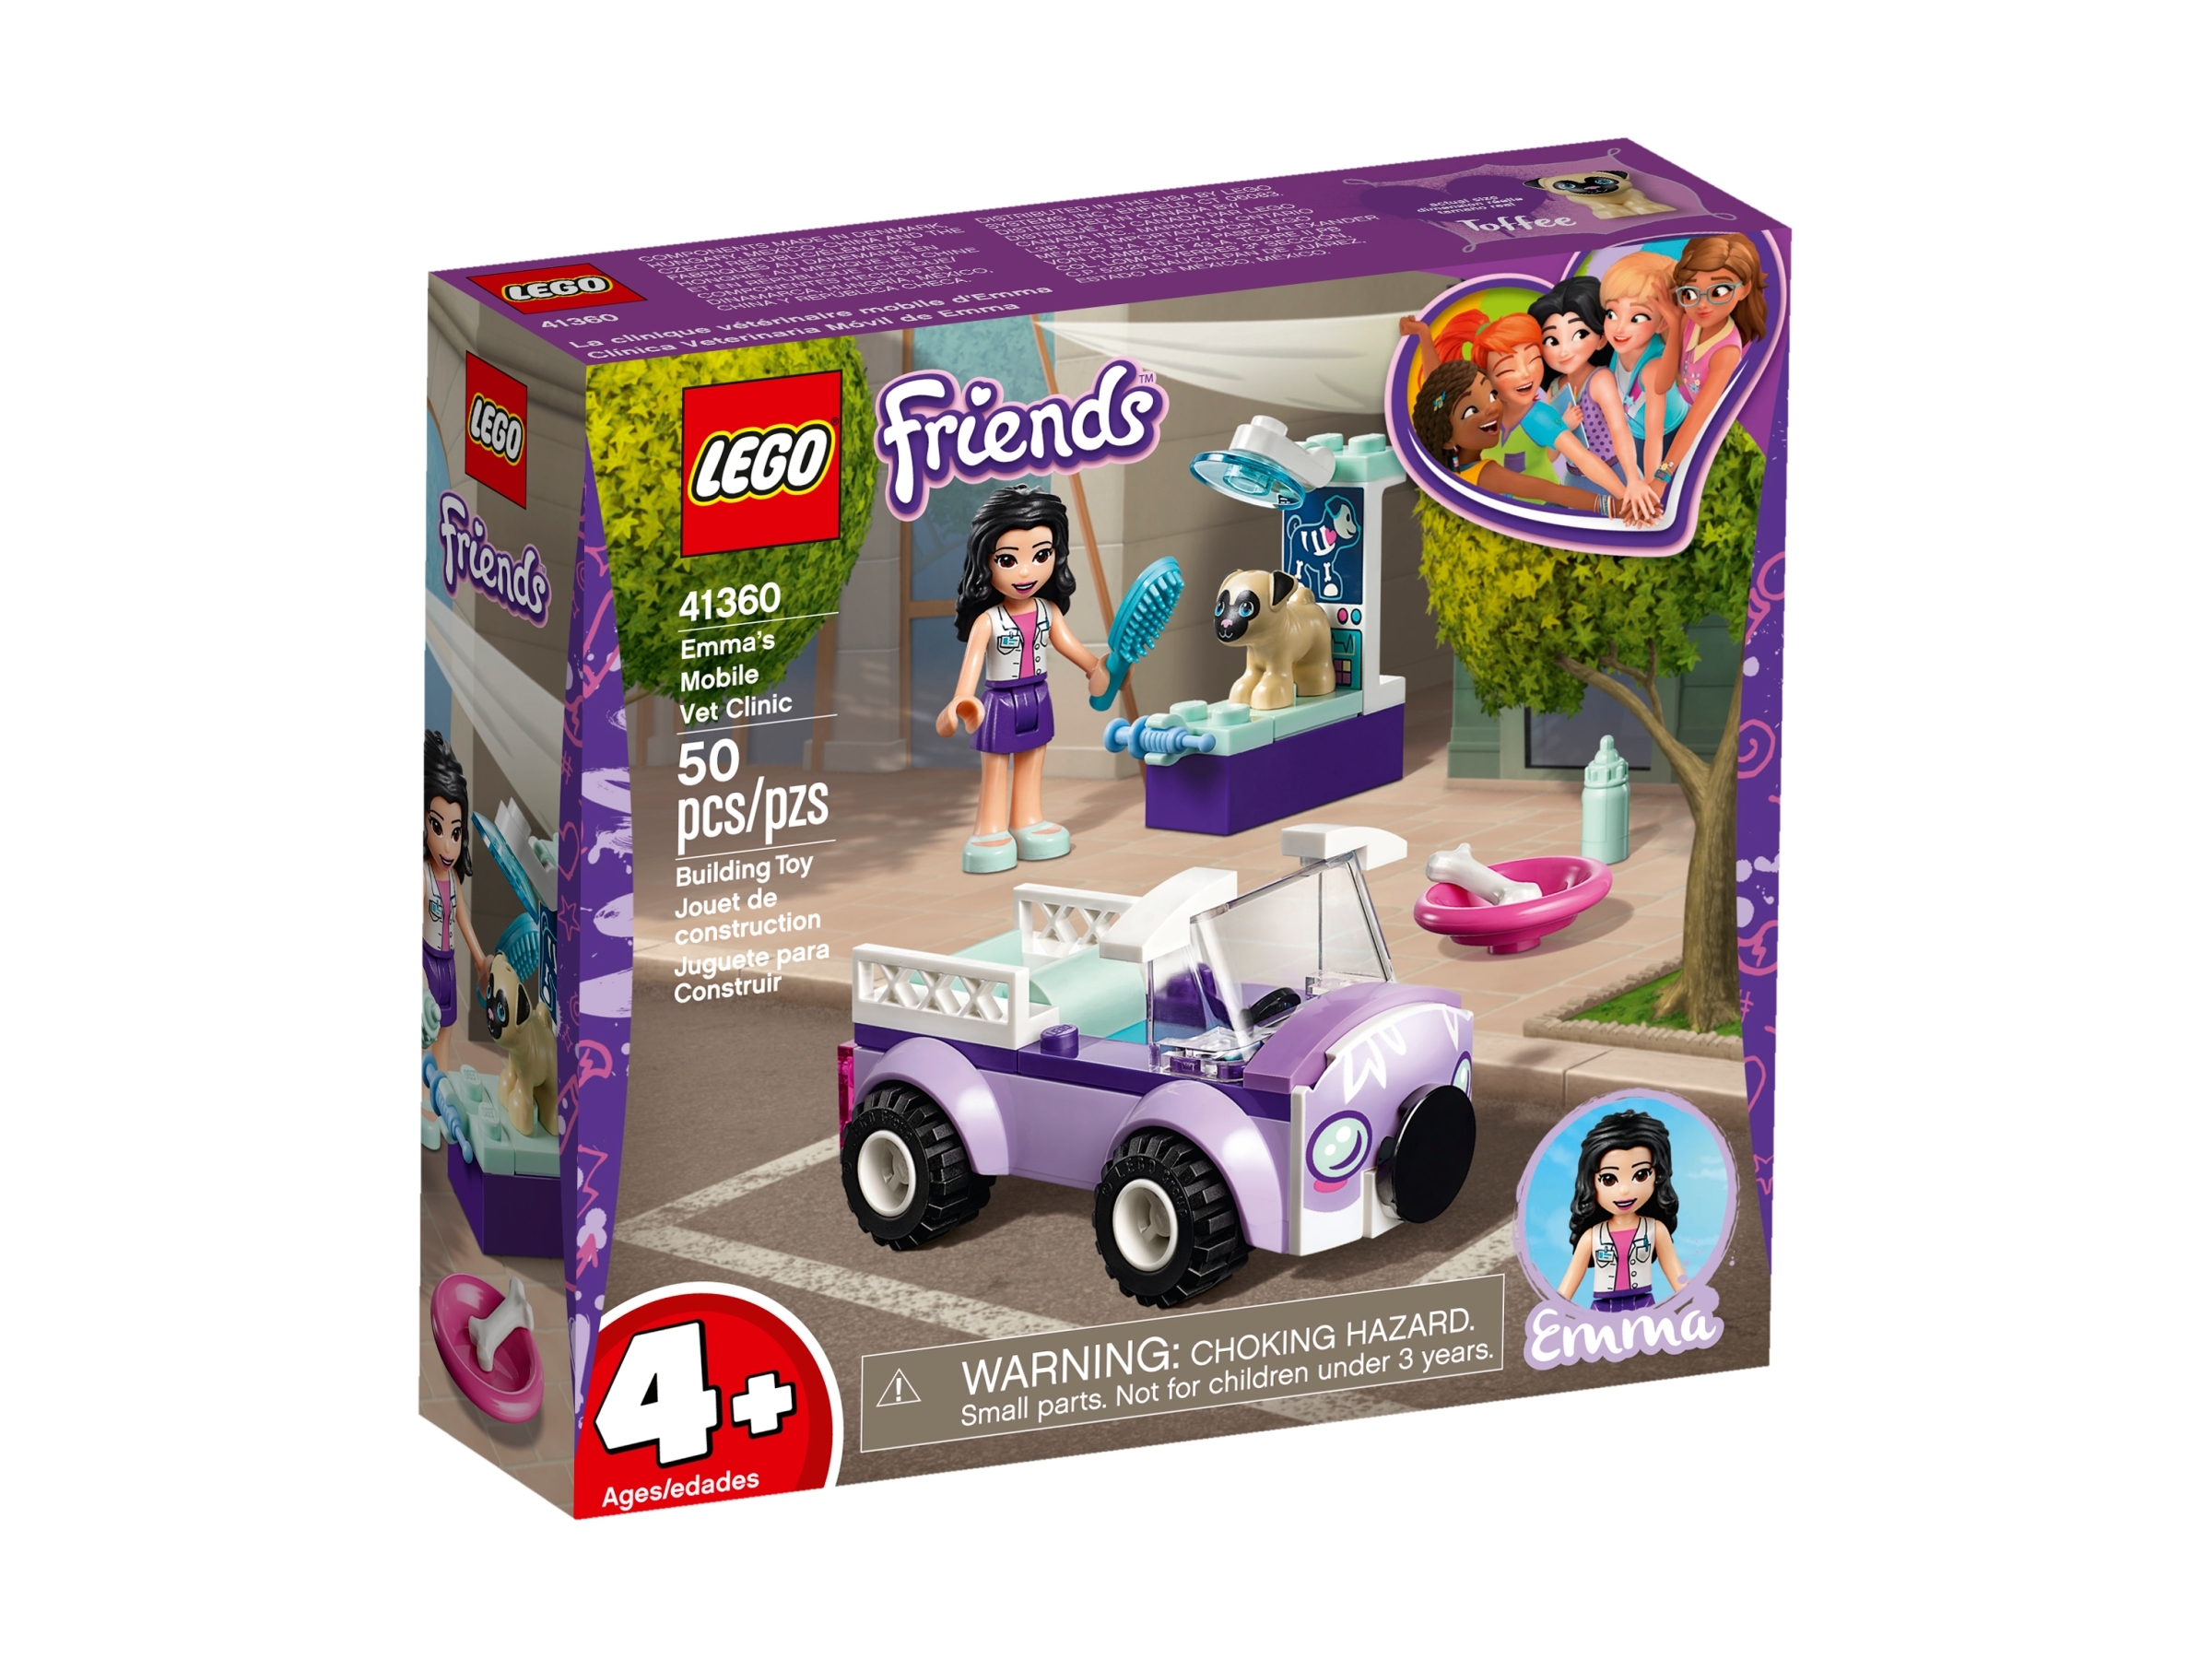 41360 LEGO Friends Emma's Mobile Vet Clinic With Pug Dog Pet Care Theme 